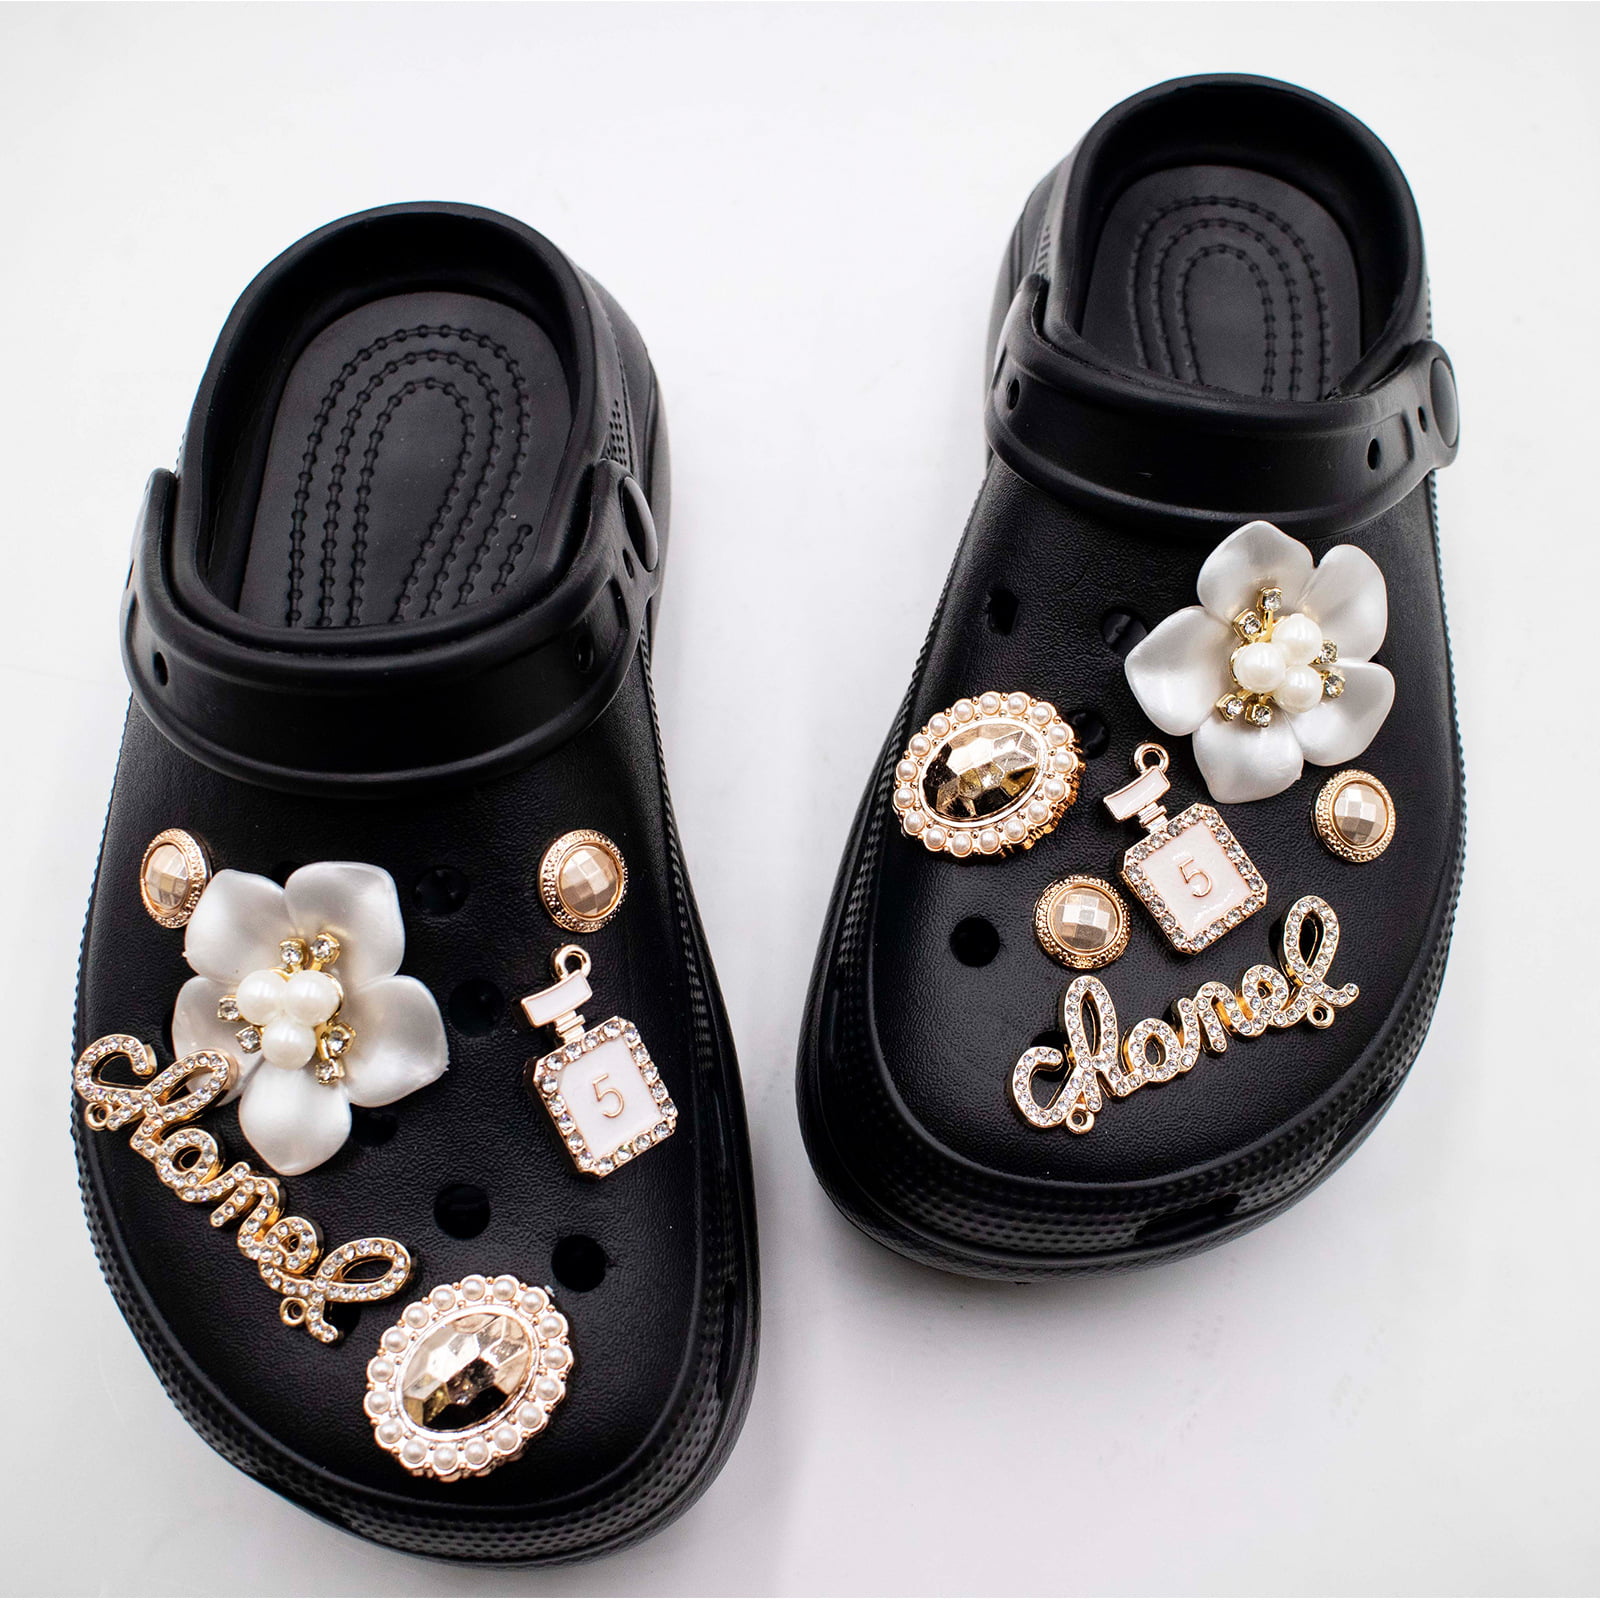 31 PCS Shoe Accessories Sandals Shoe Buckles Slippers Shoe Decoration Charms Faux Crystal Pearl Rhinestones Decorative Shoe Buckles Fashion Accessories for Hole Shoes Girls and Women Favorite Accessories Gift